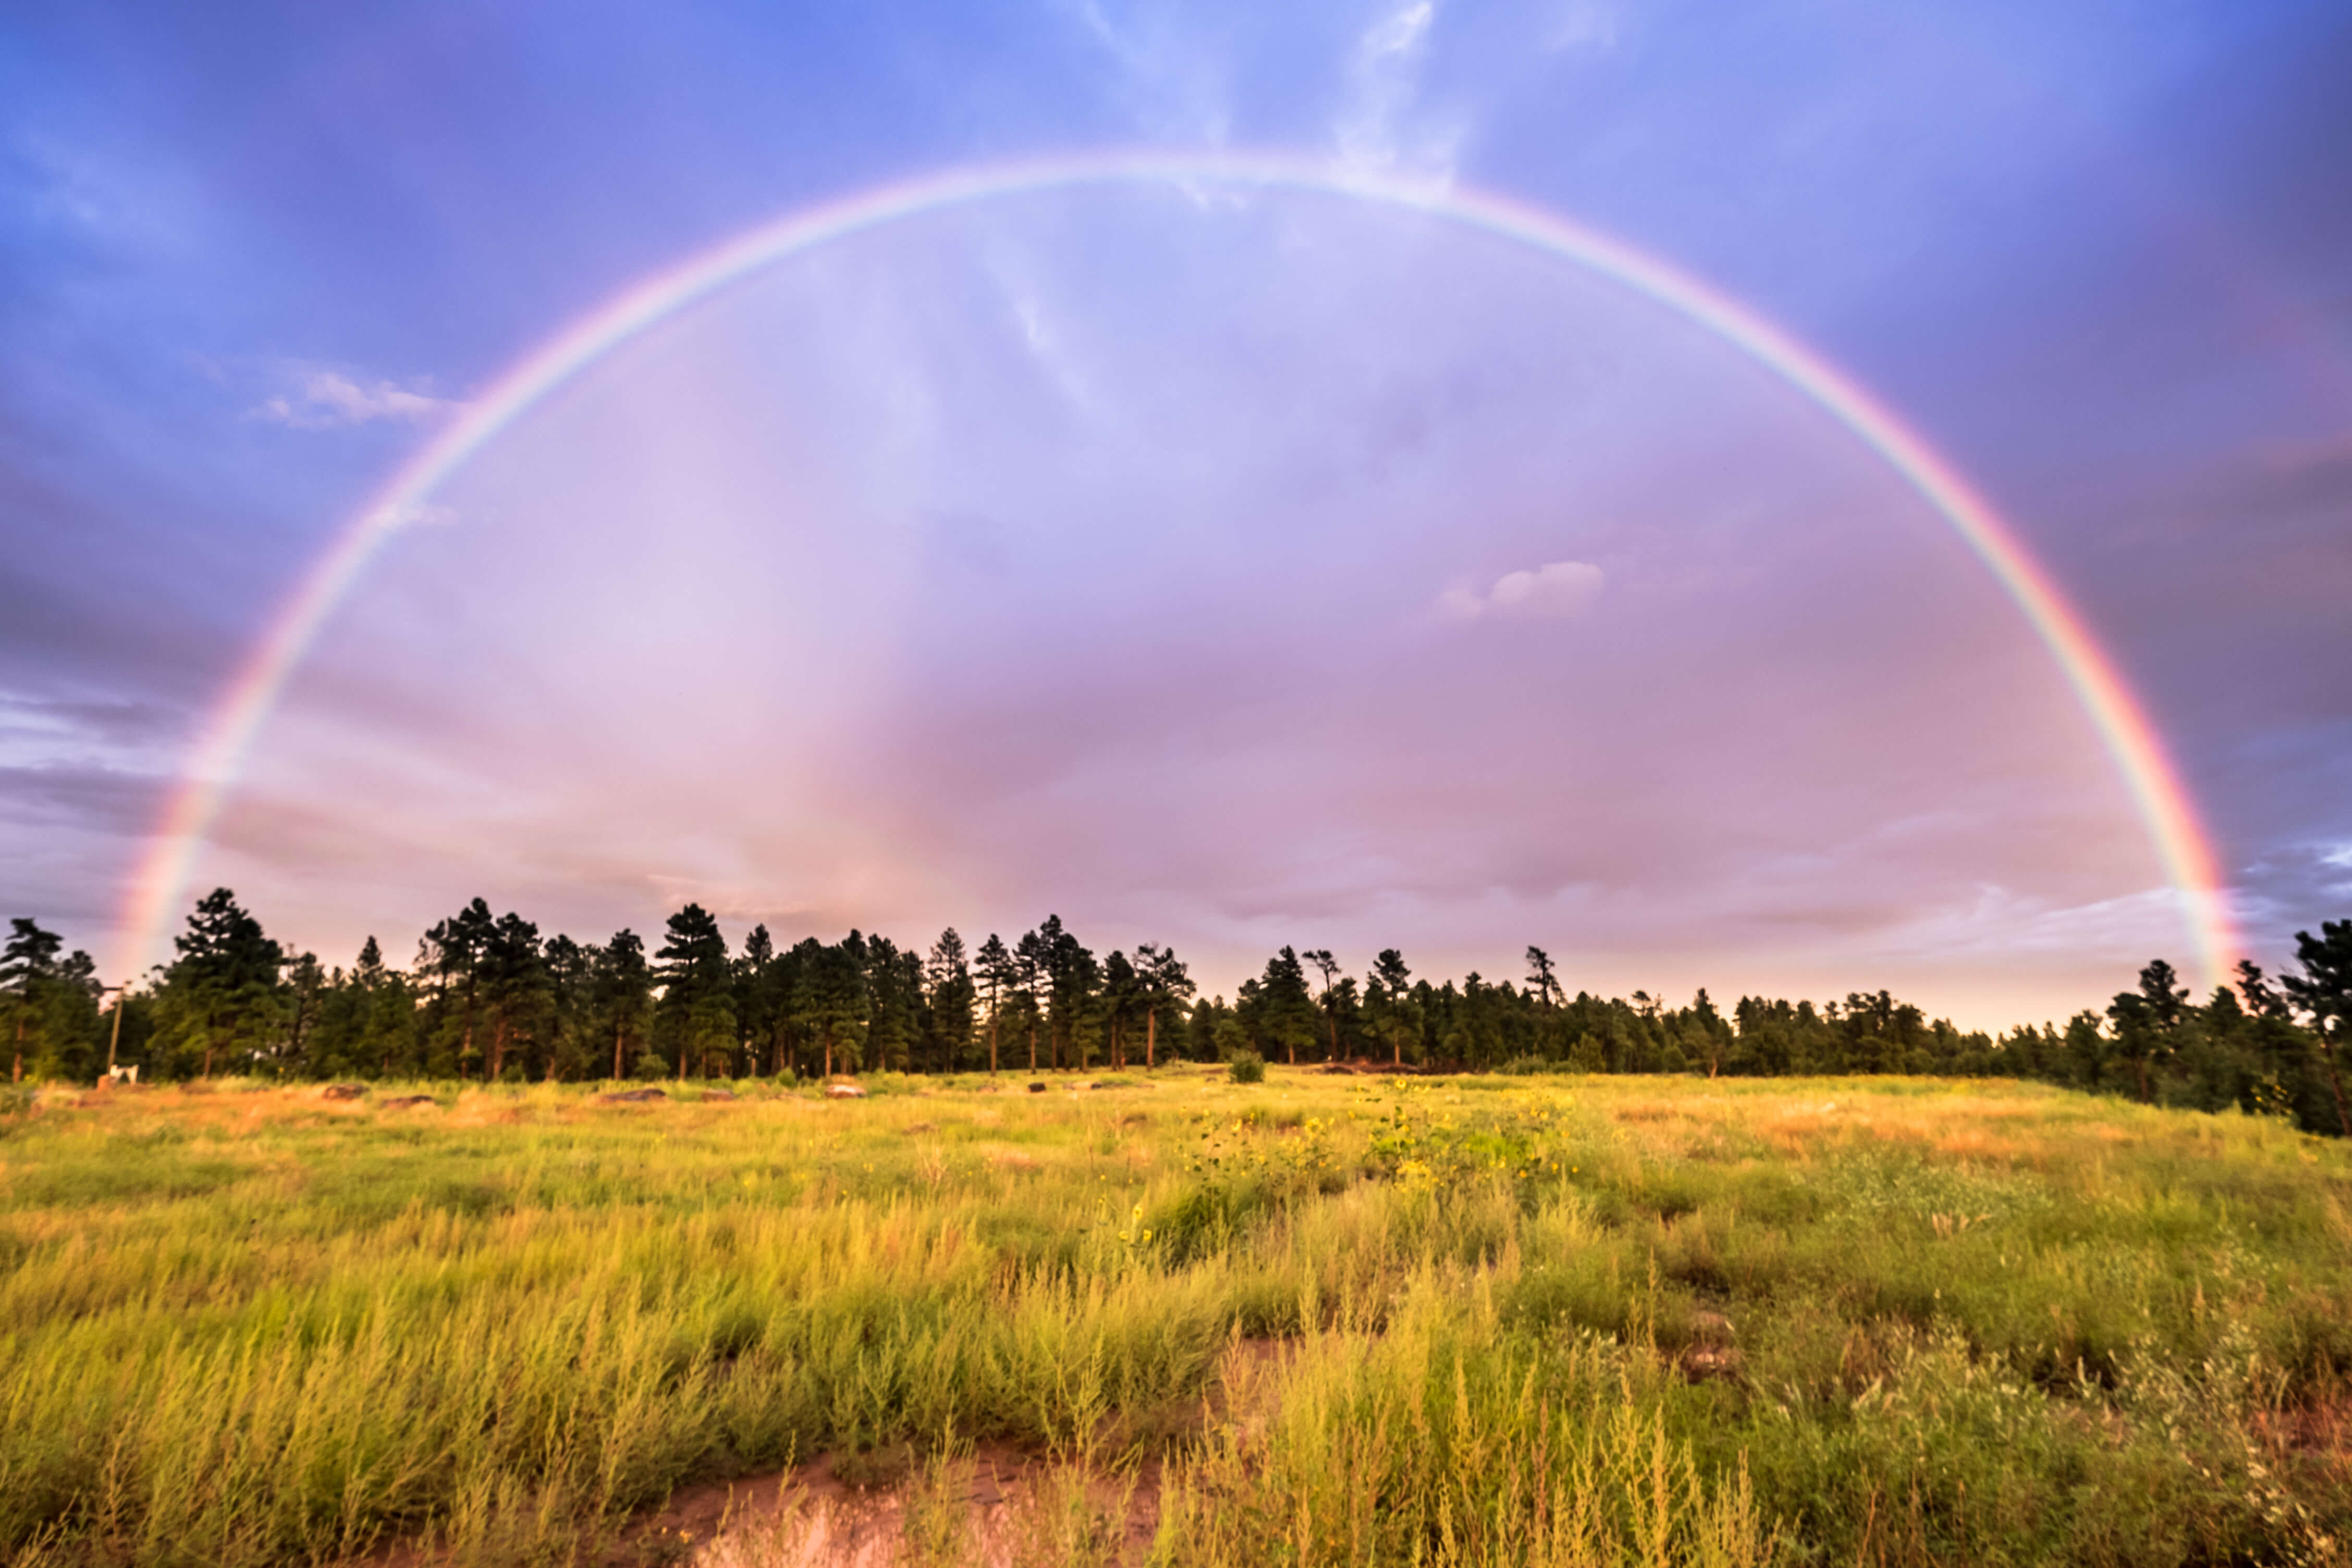 A perfect picture of a rainbows arch over a field in Flagstaff.